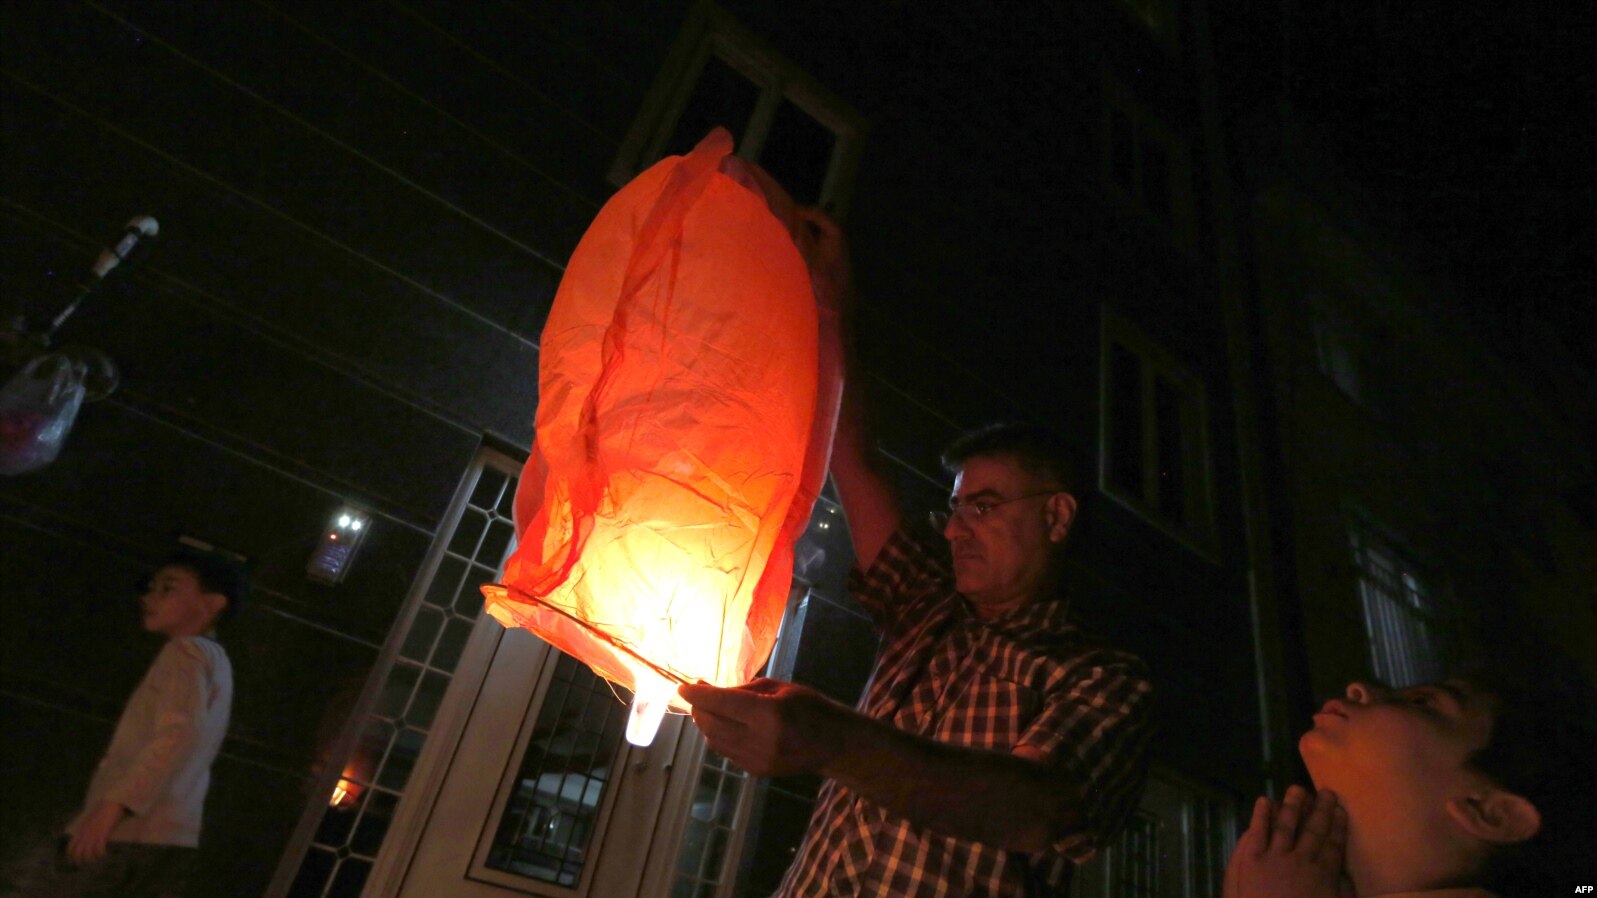 An Iranian man lights a lantern outside their houses in Tehran on March 13, 2018 during the Wednesday Fire feast, or Chaharshanbeh Soori, held annually on the last Wednesday eve before the Spring holiday of Noruz. The Iranian new year that begins on Marc